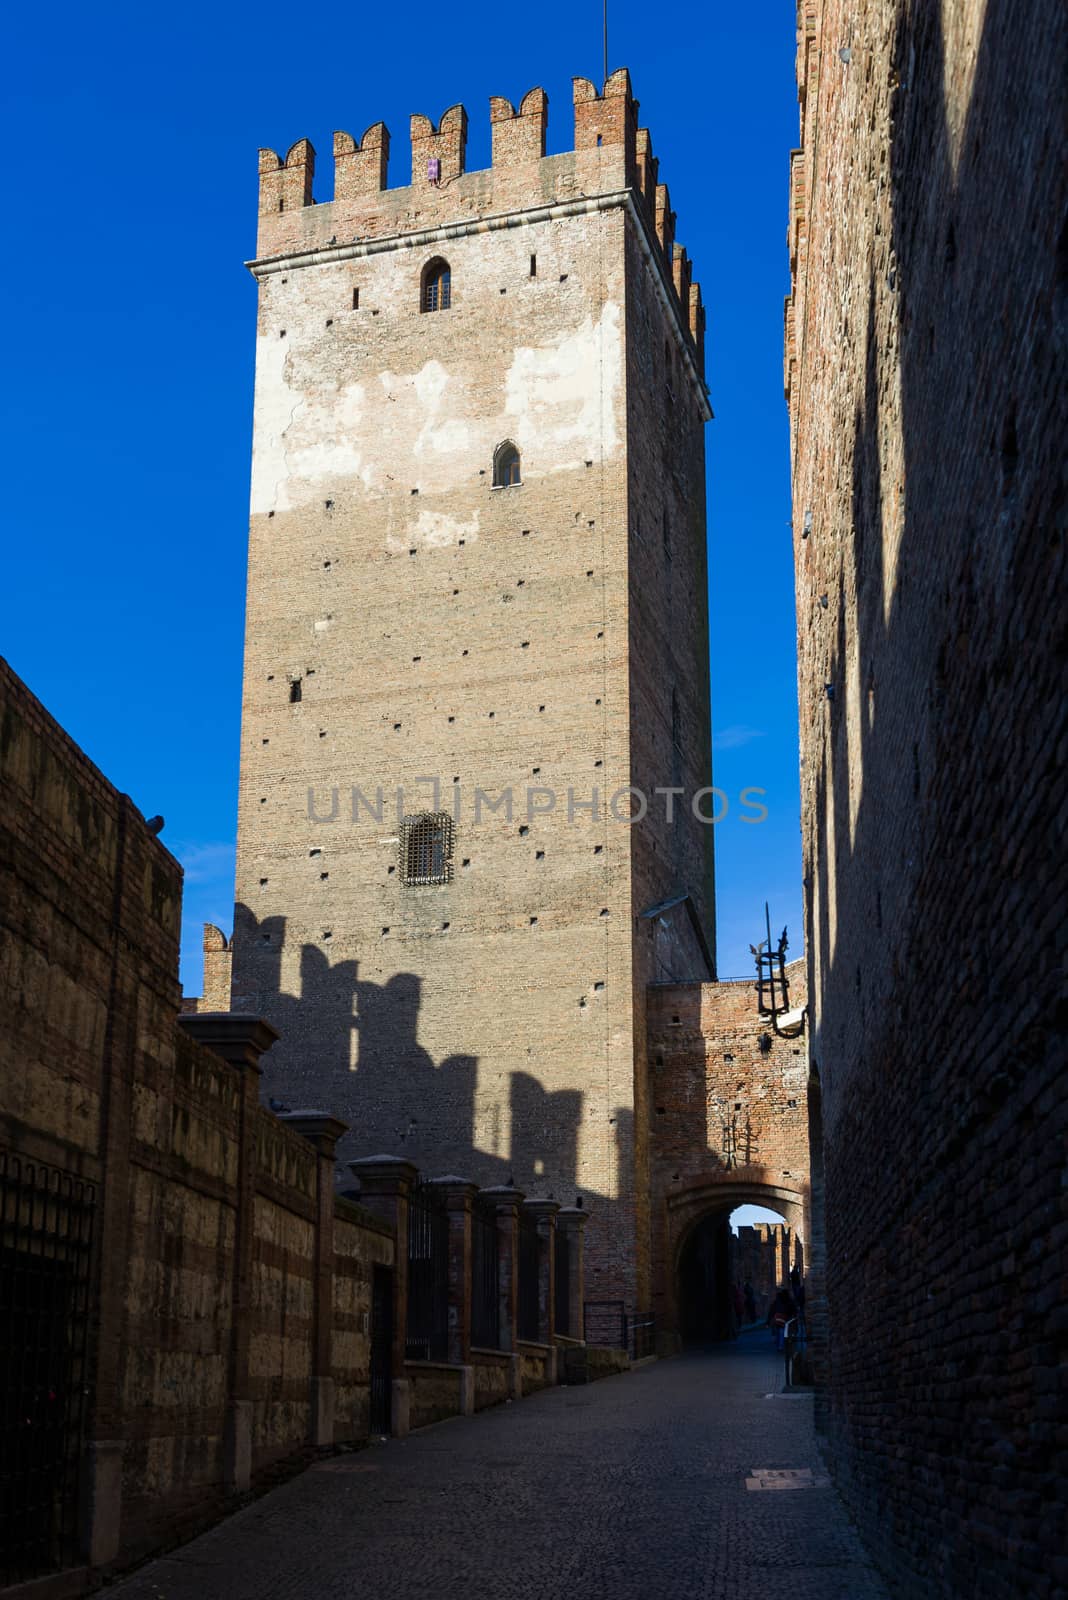 Tower of the medieval castle of Castelvecchio, one of the symbols of Verona